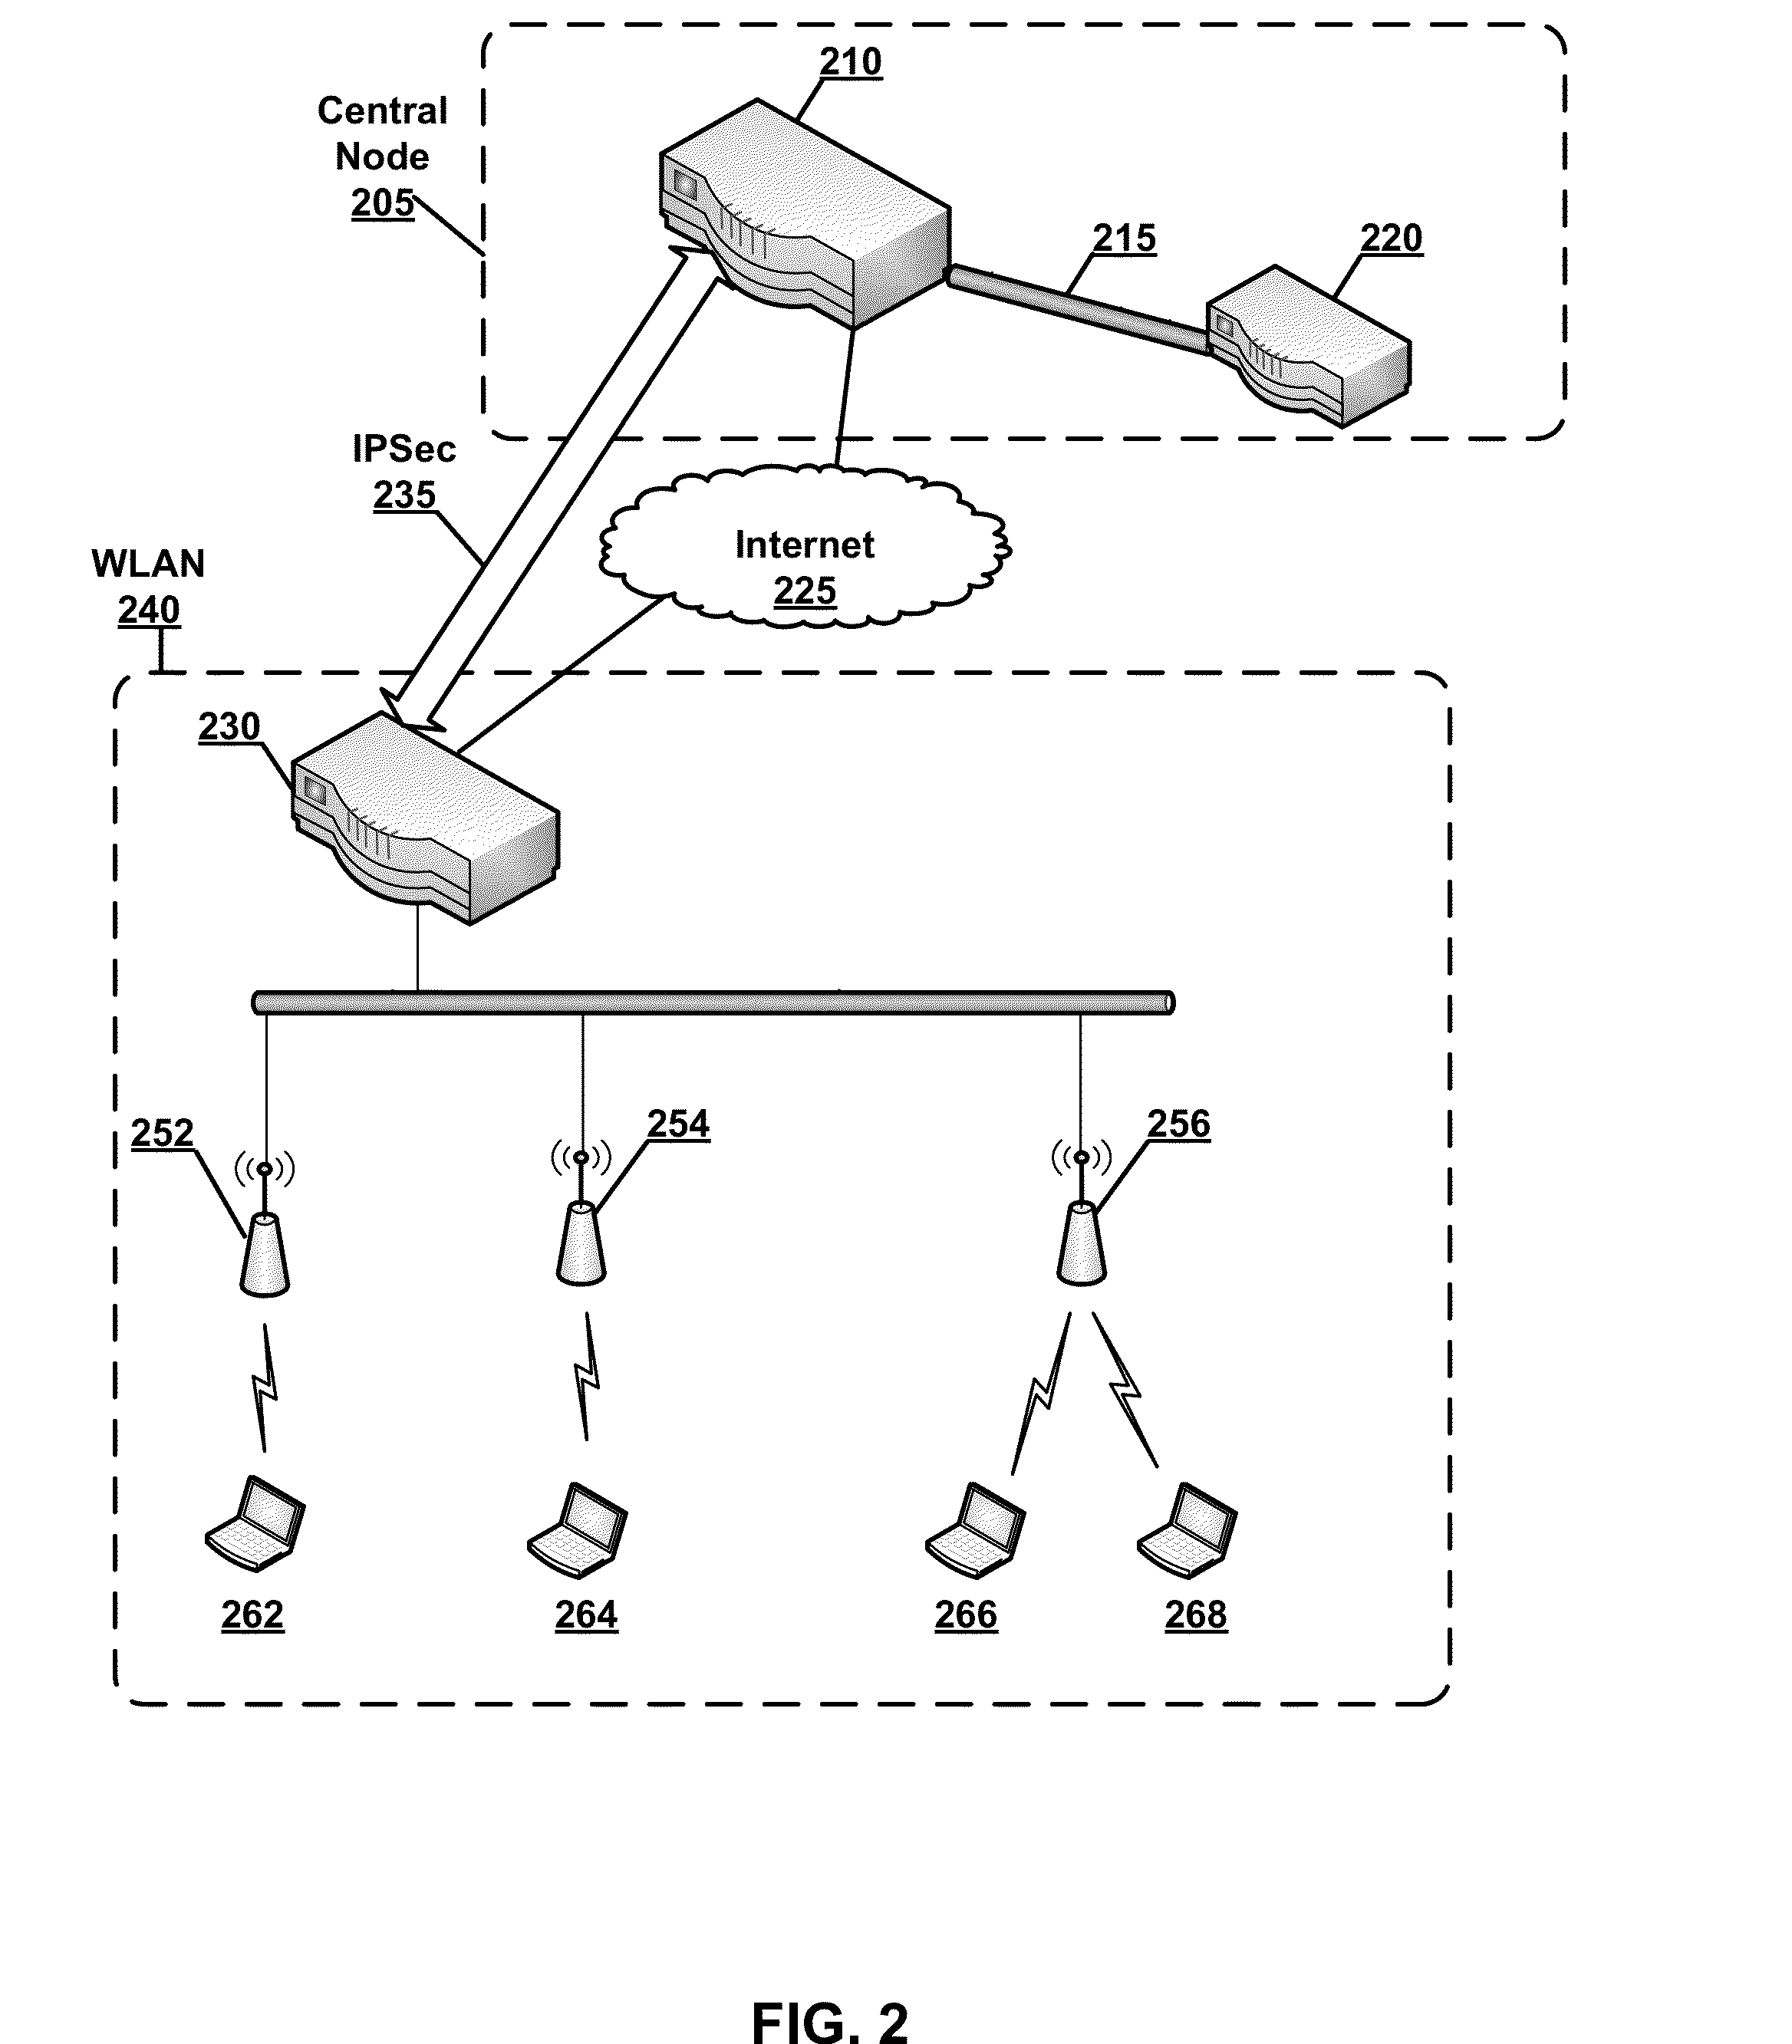 Centralized Configuration with Dynamic Distributed Address Management